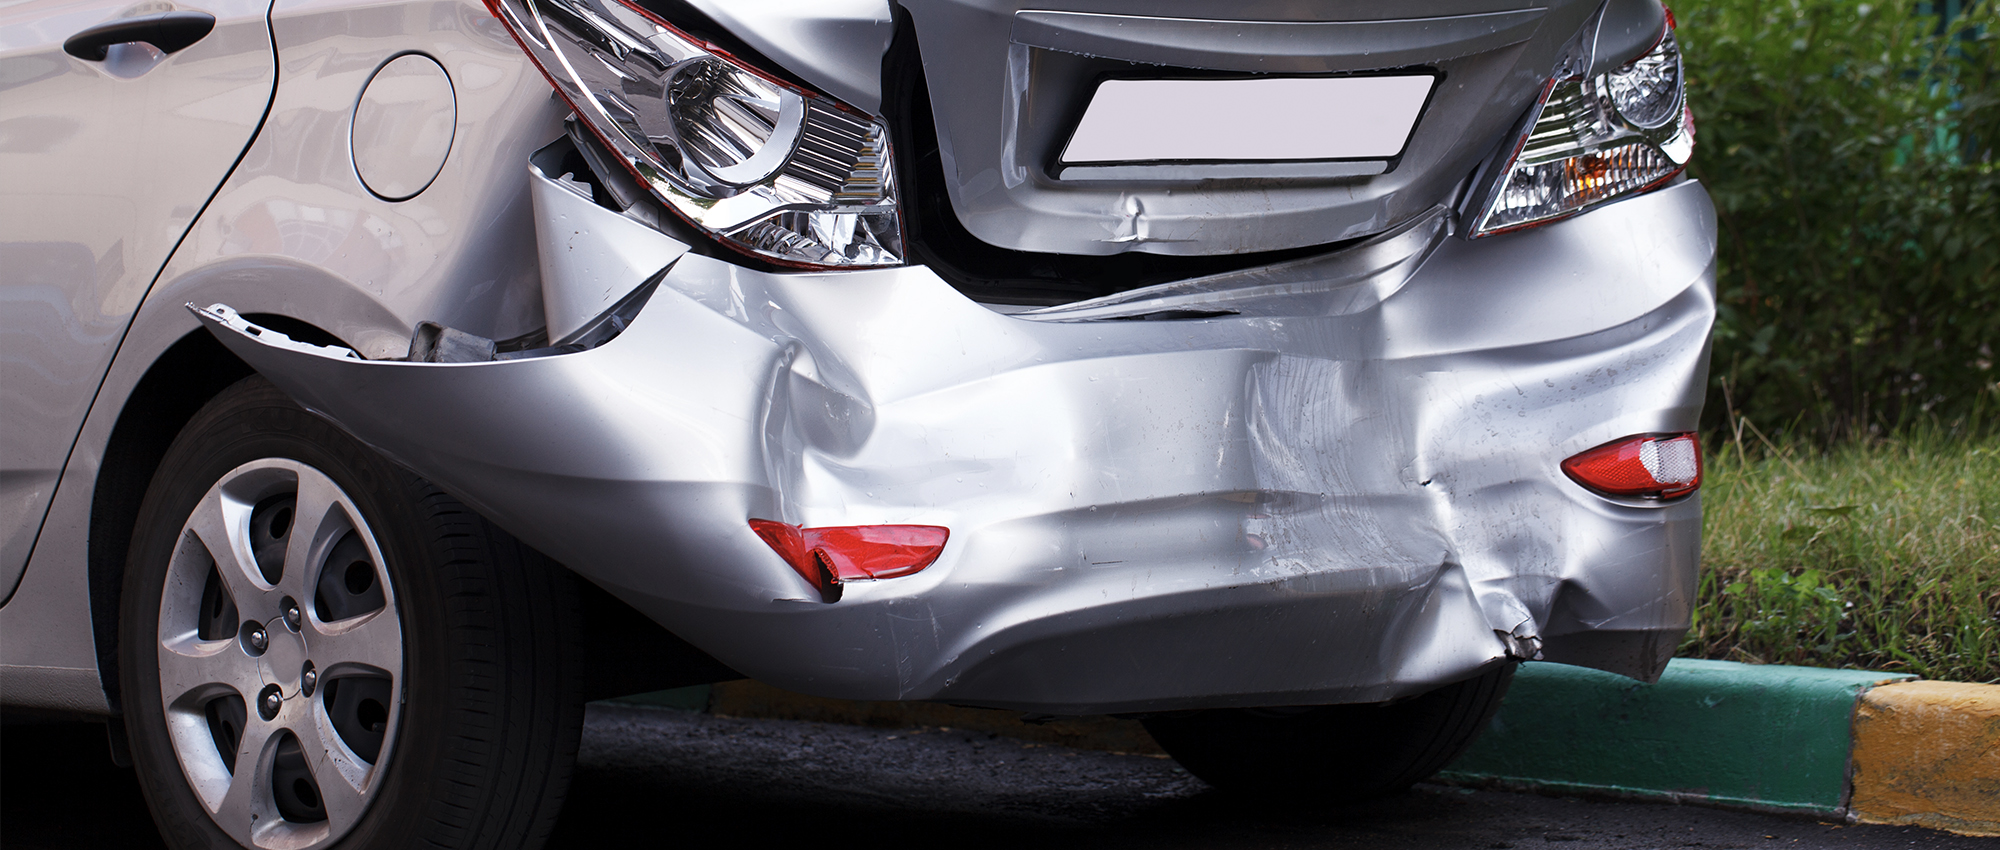 Rear End Accidents in Myrtle Beach